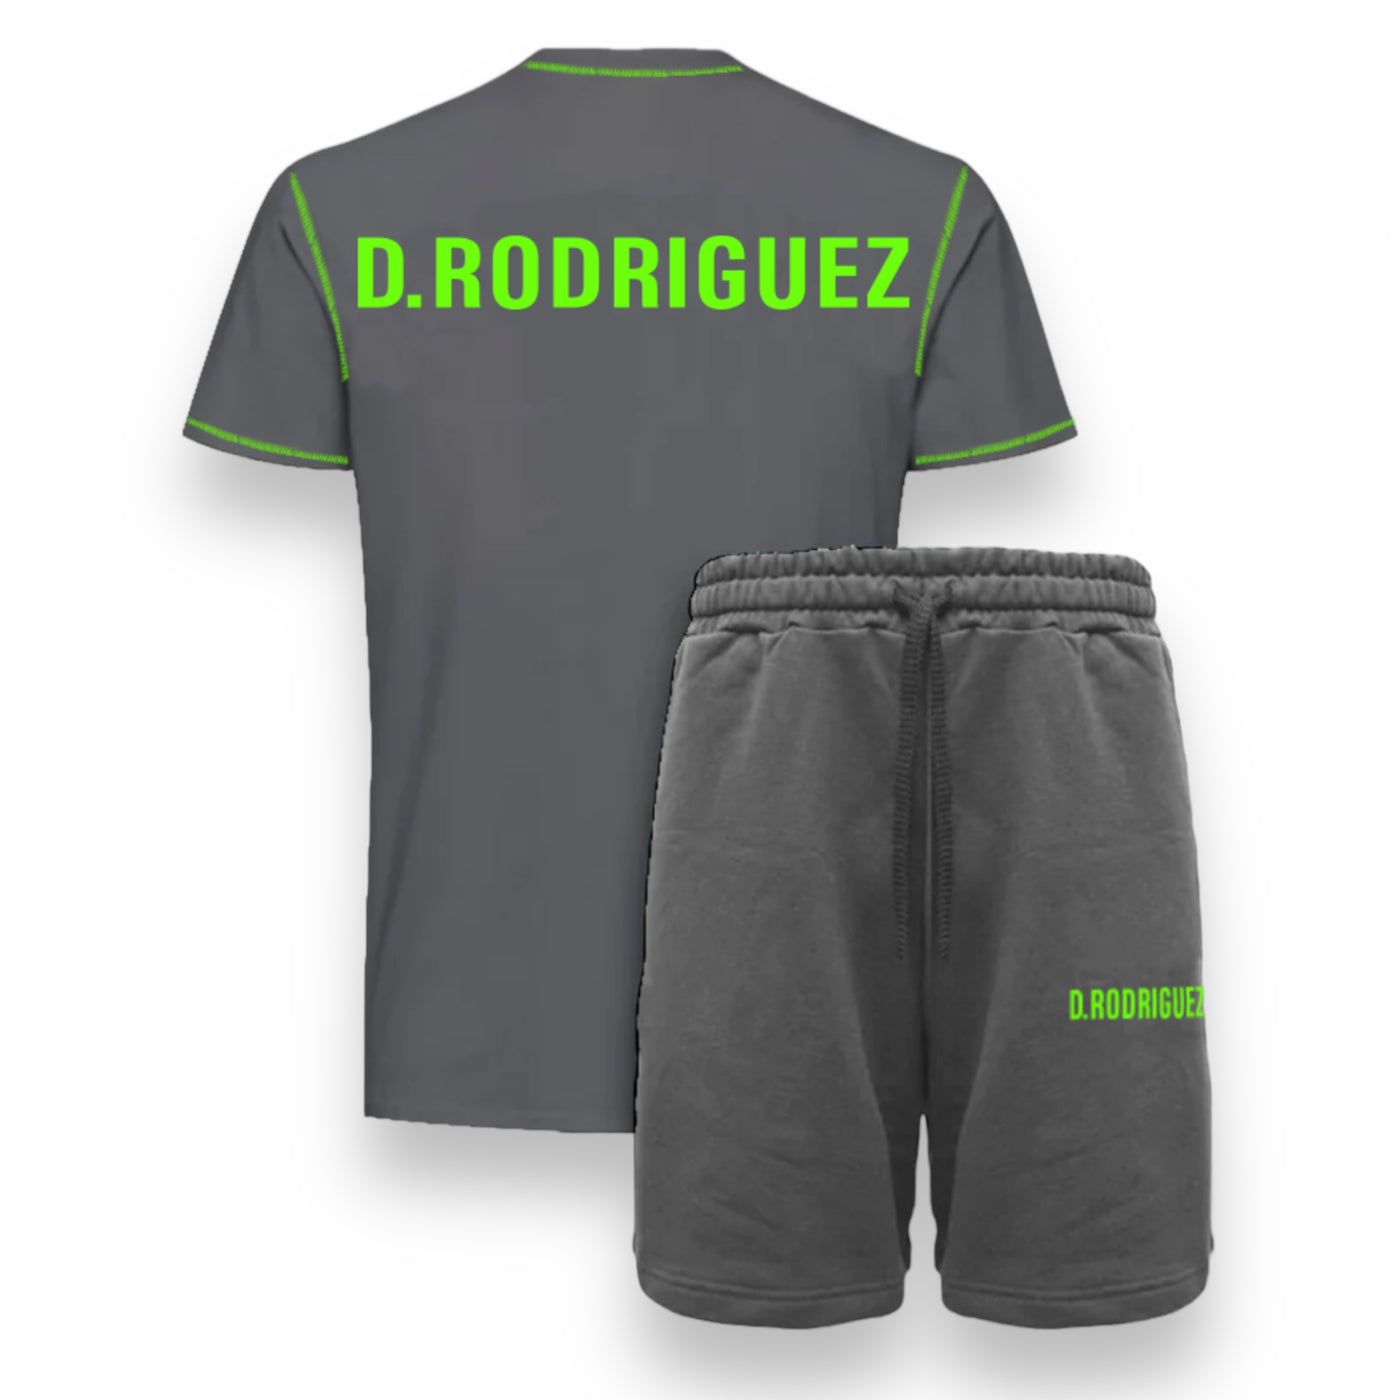 Outfit Diego Rodriguez Piombo